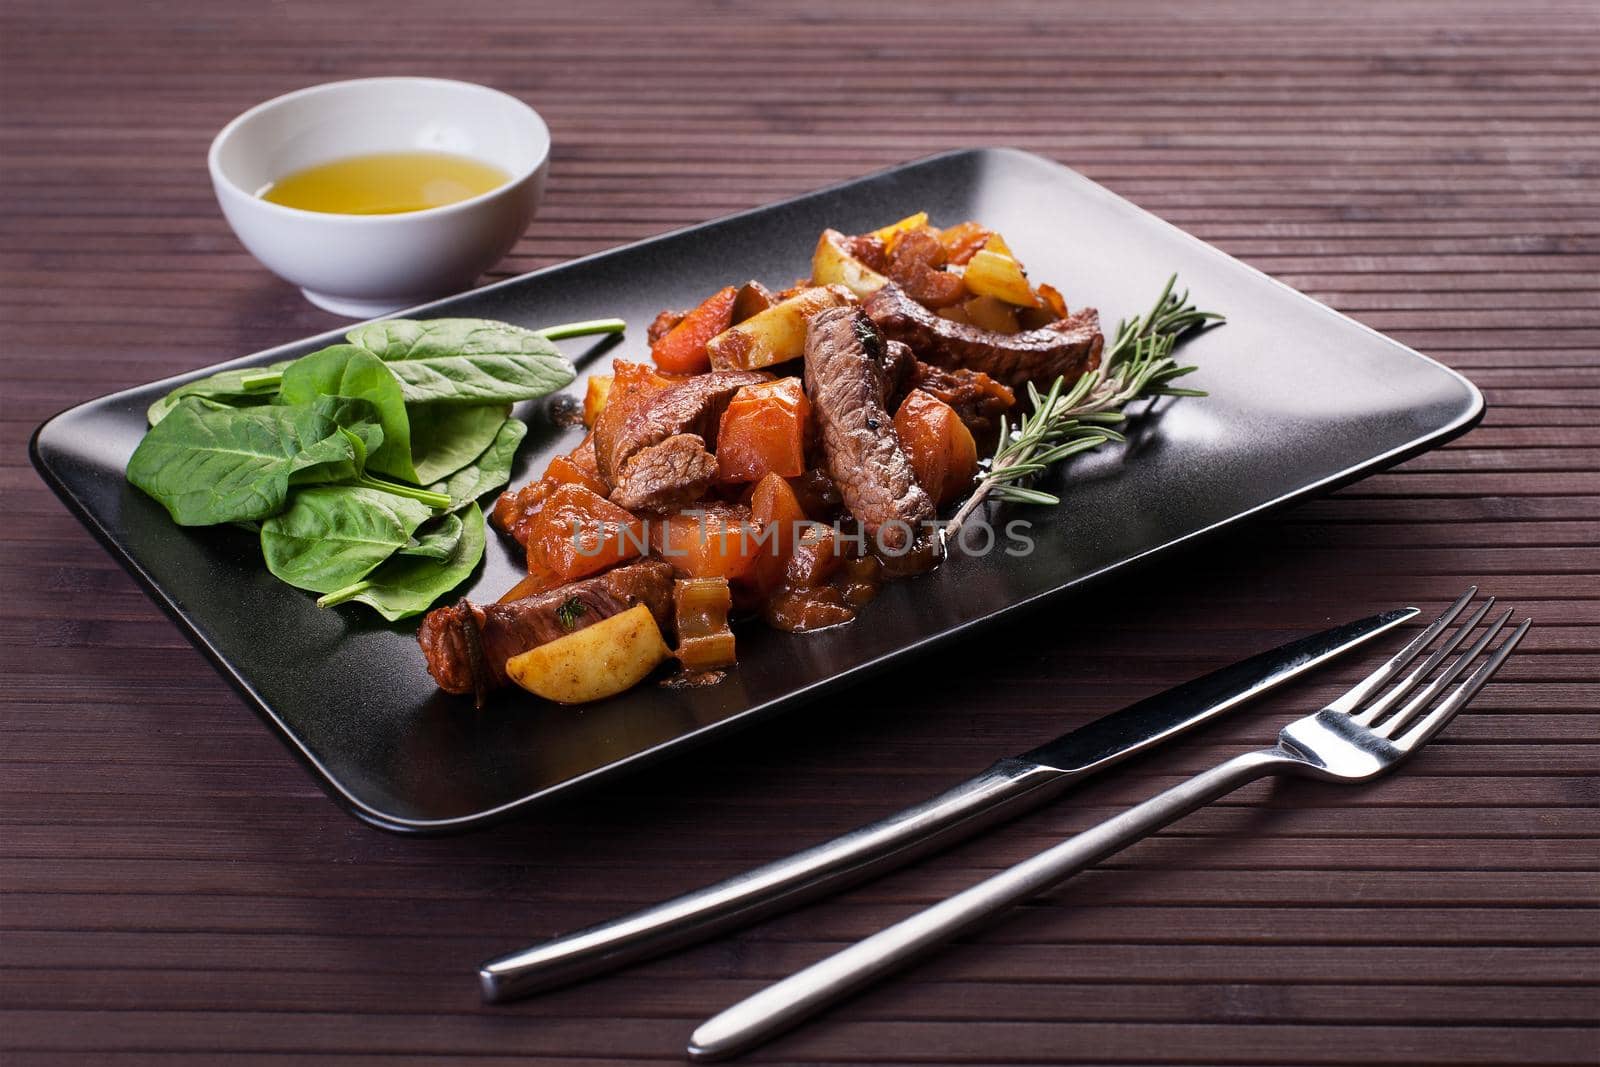 Braised veal with eggplant and other vegetables Black plate. Stock image.